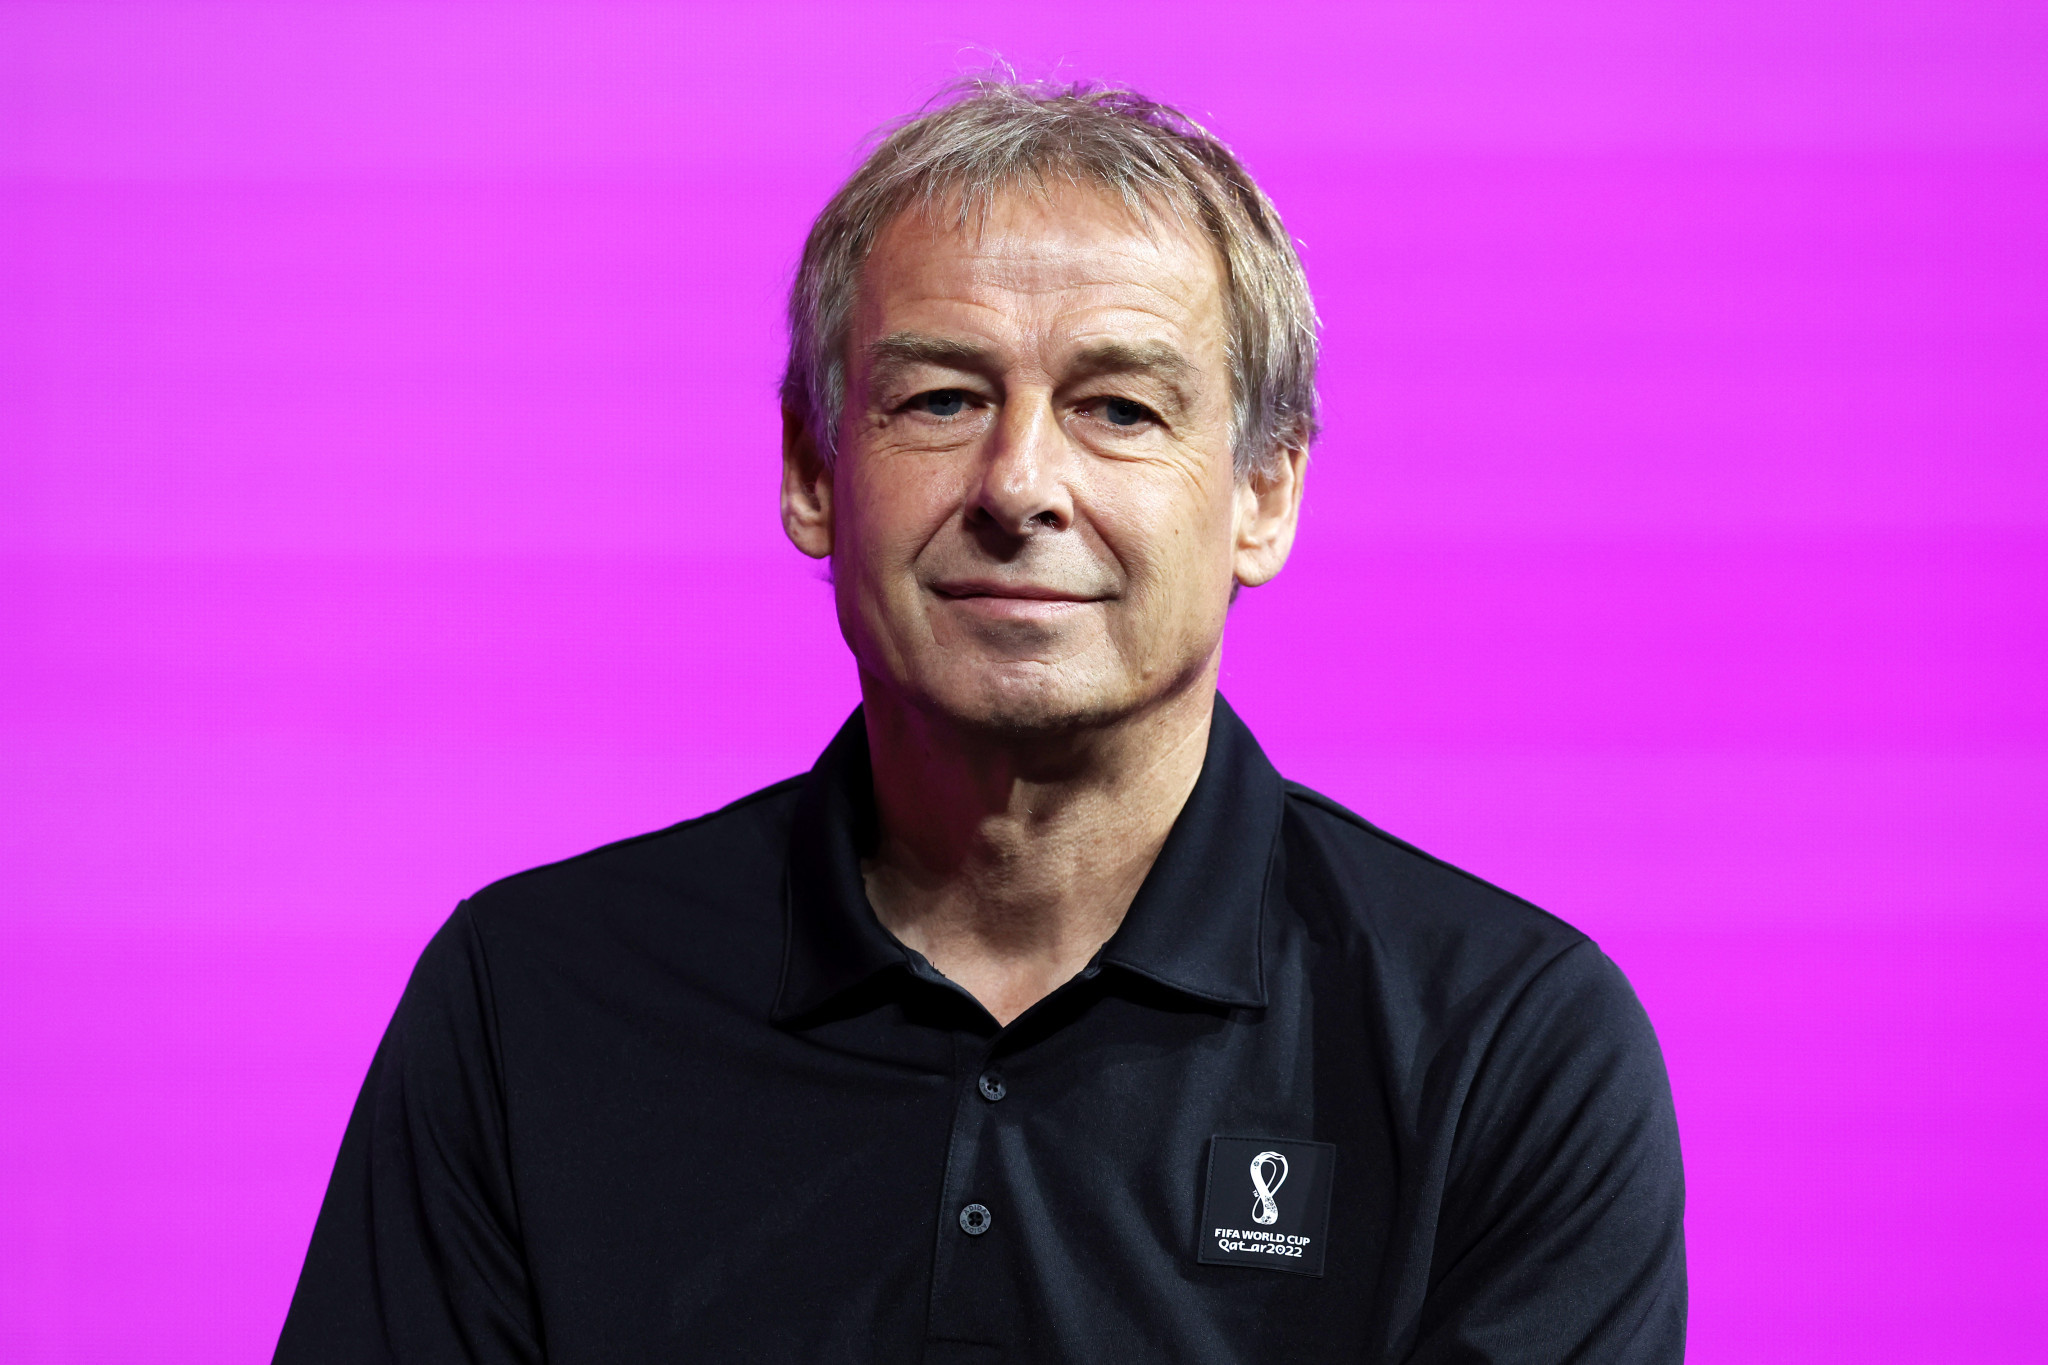 Jürgen Klinsmann said he was "delighted and honoured" to become South Korea's manager ©Getty Images